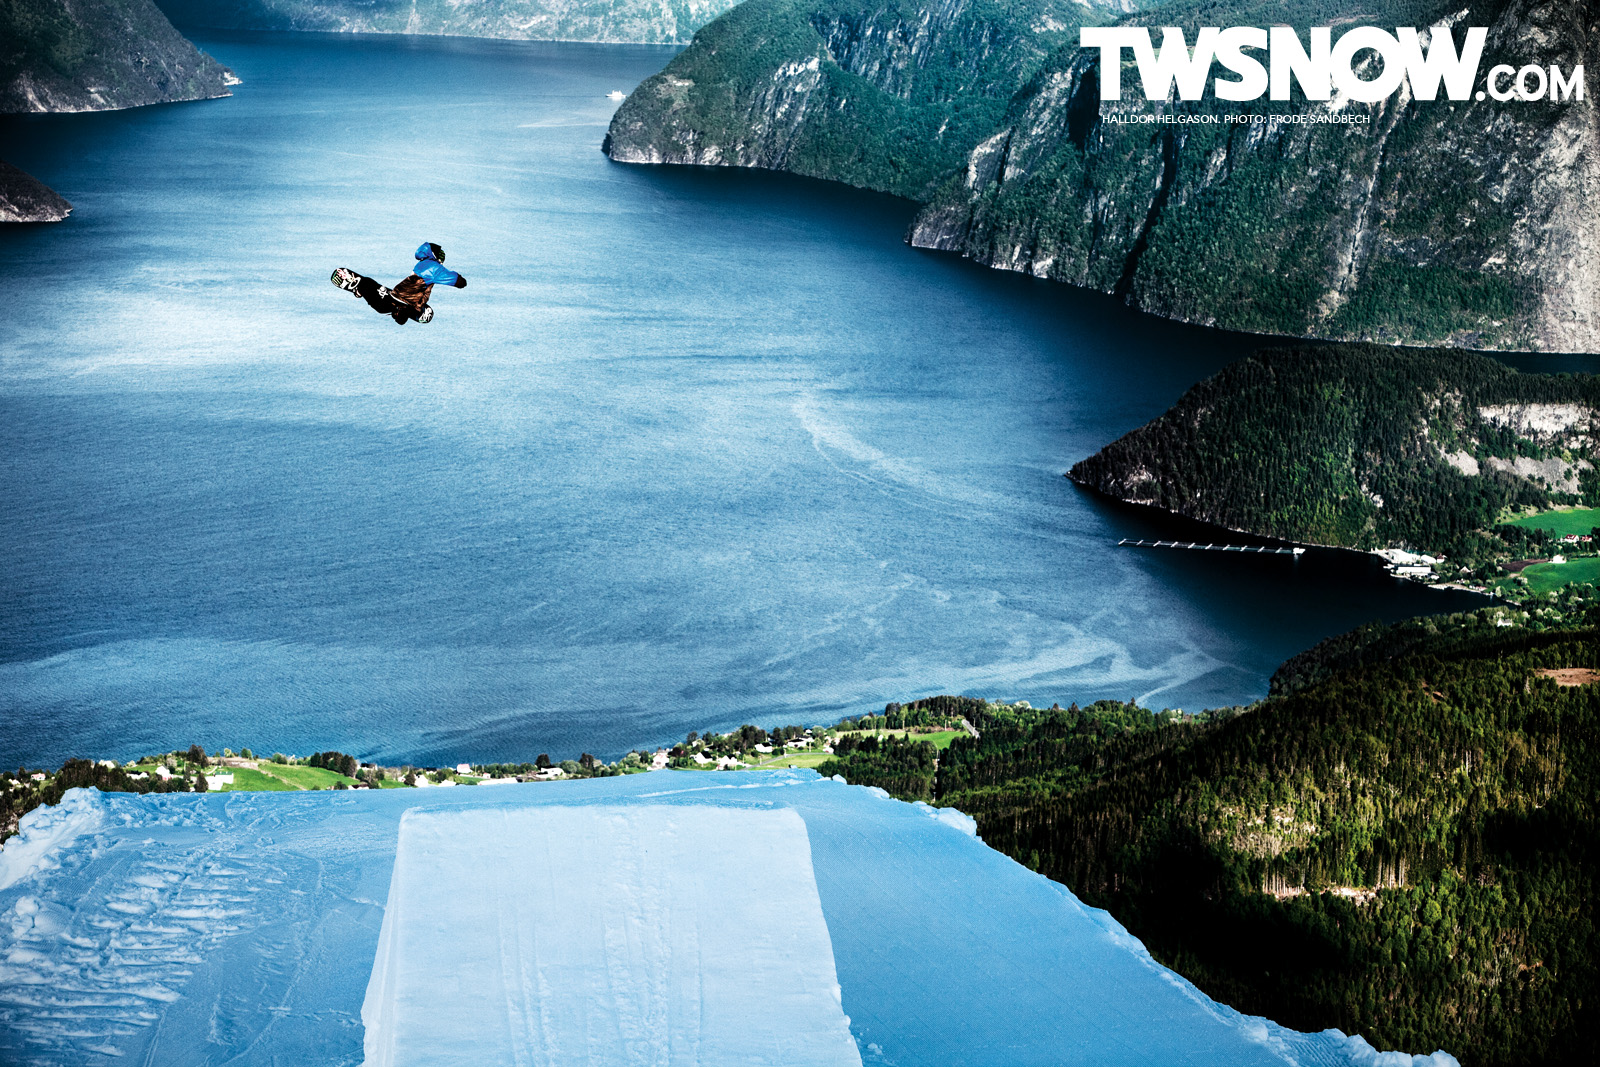 Wallpaper Wednesday Style Council Transworld Snowboarding